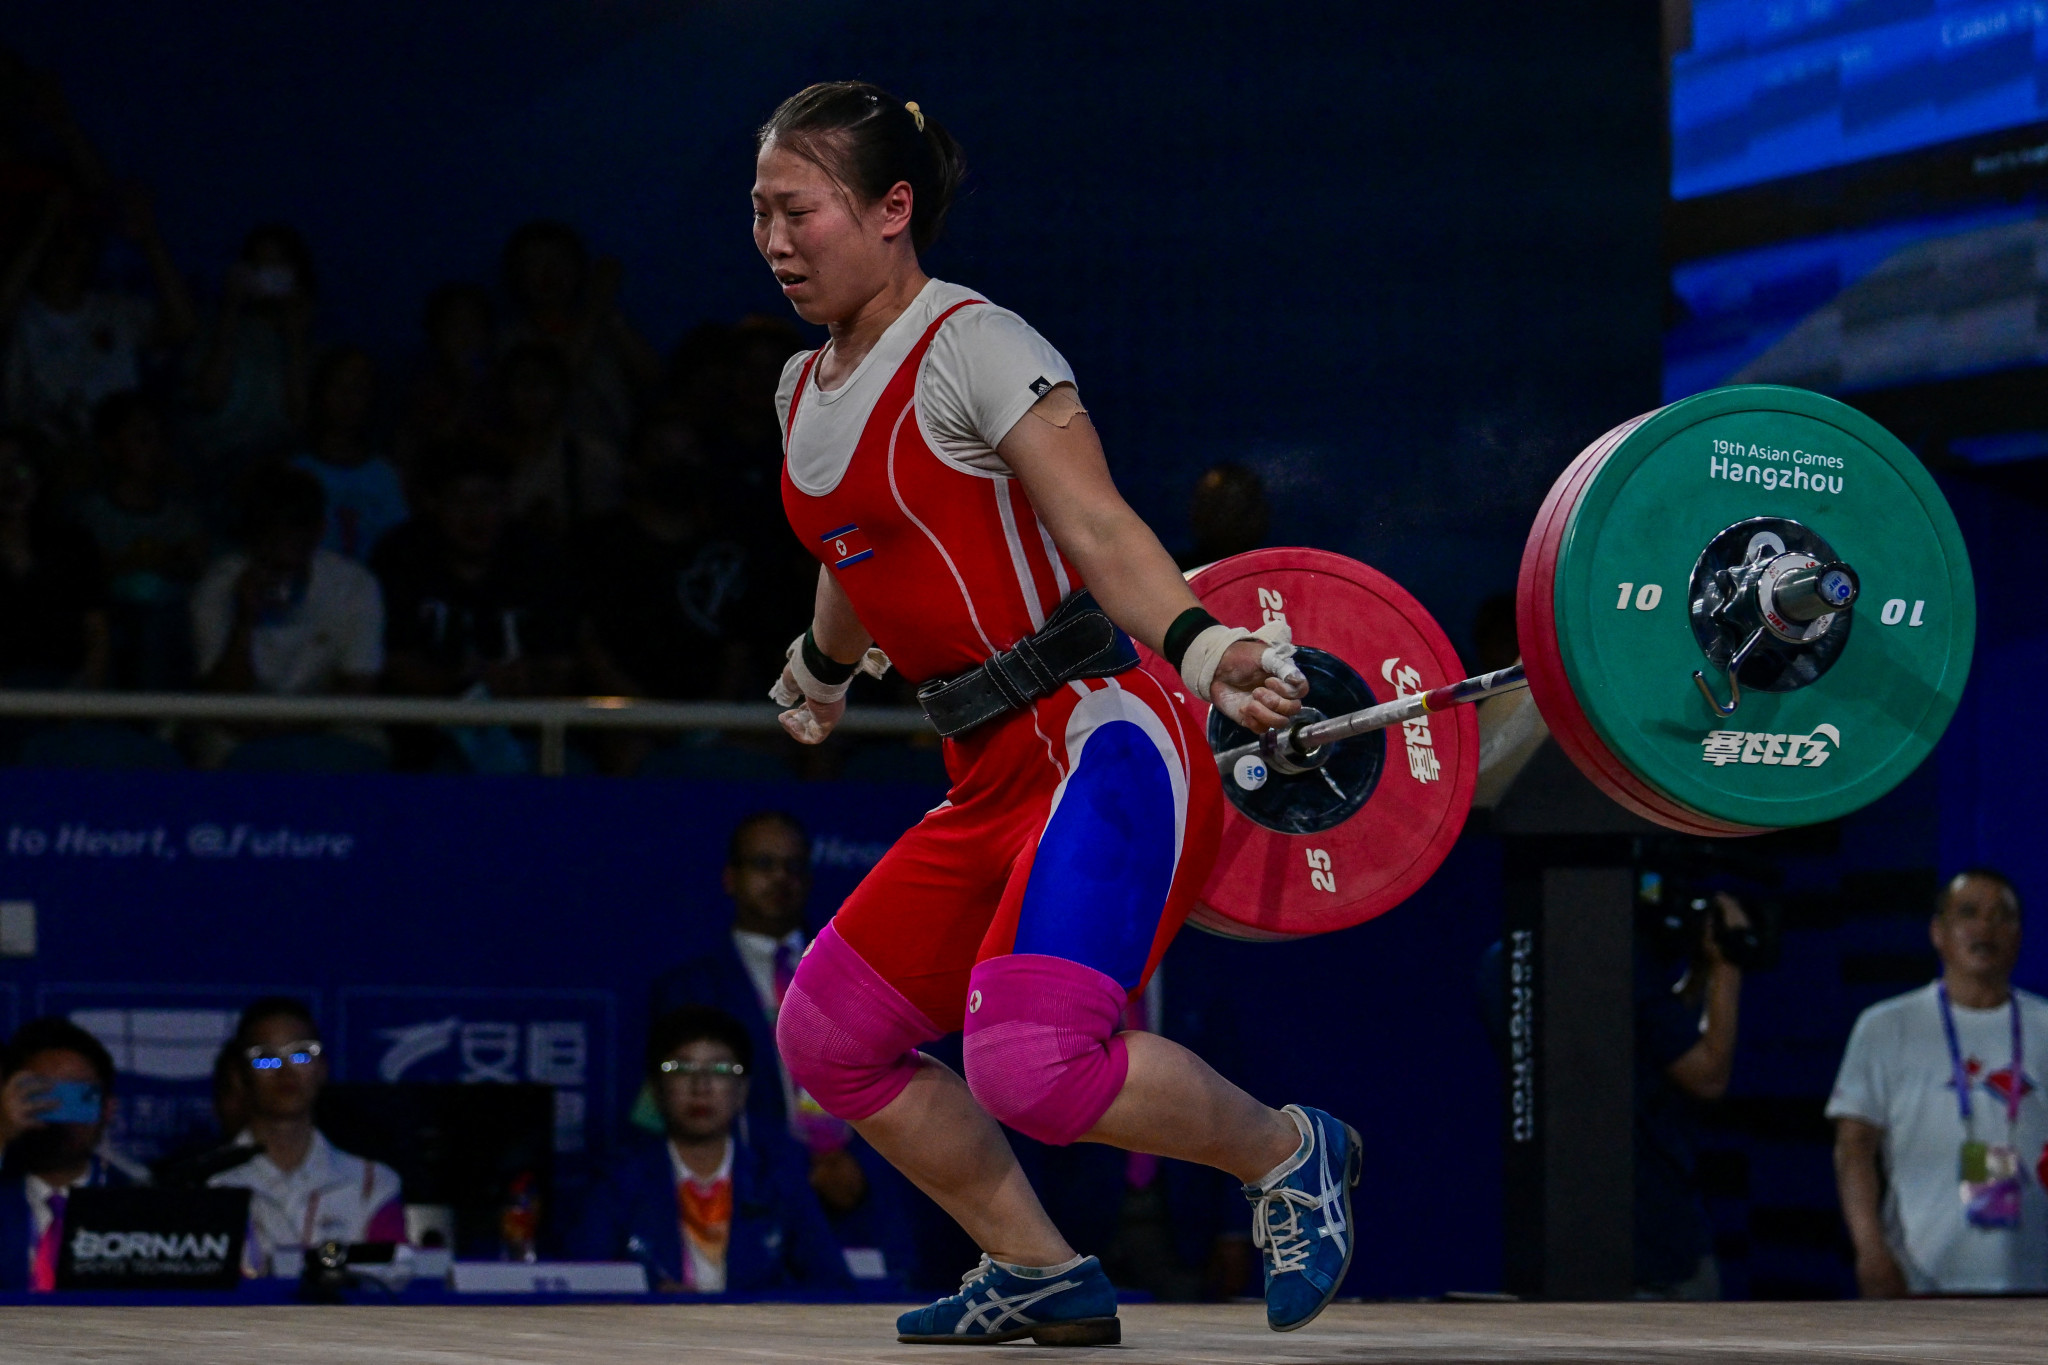 North Korean Rim Un-sim finished with a total of 251kg after a snatch score of 111kg and a clean and jerk of 140kg to win the women's 64kg weightlifting title ©Getty Images